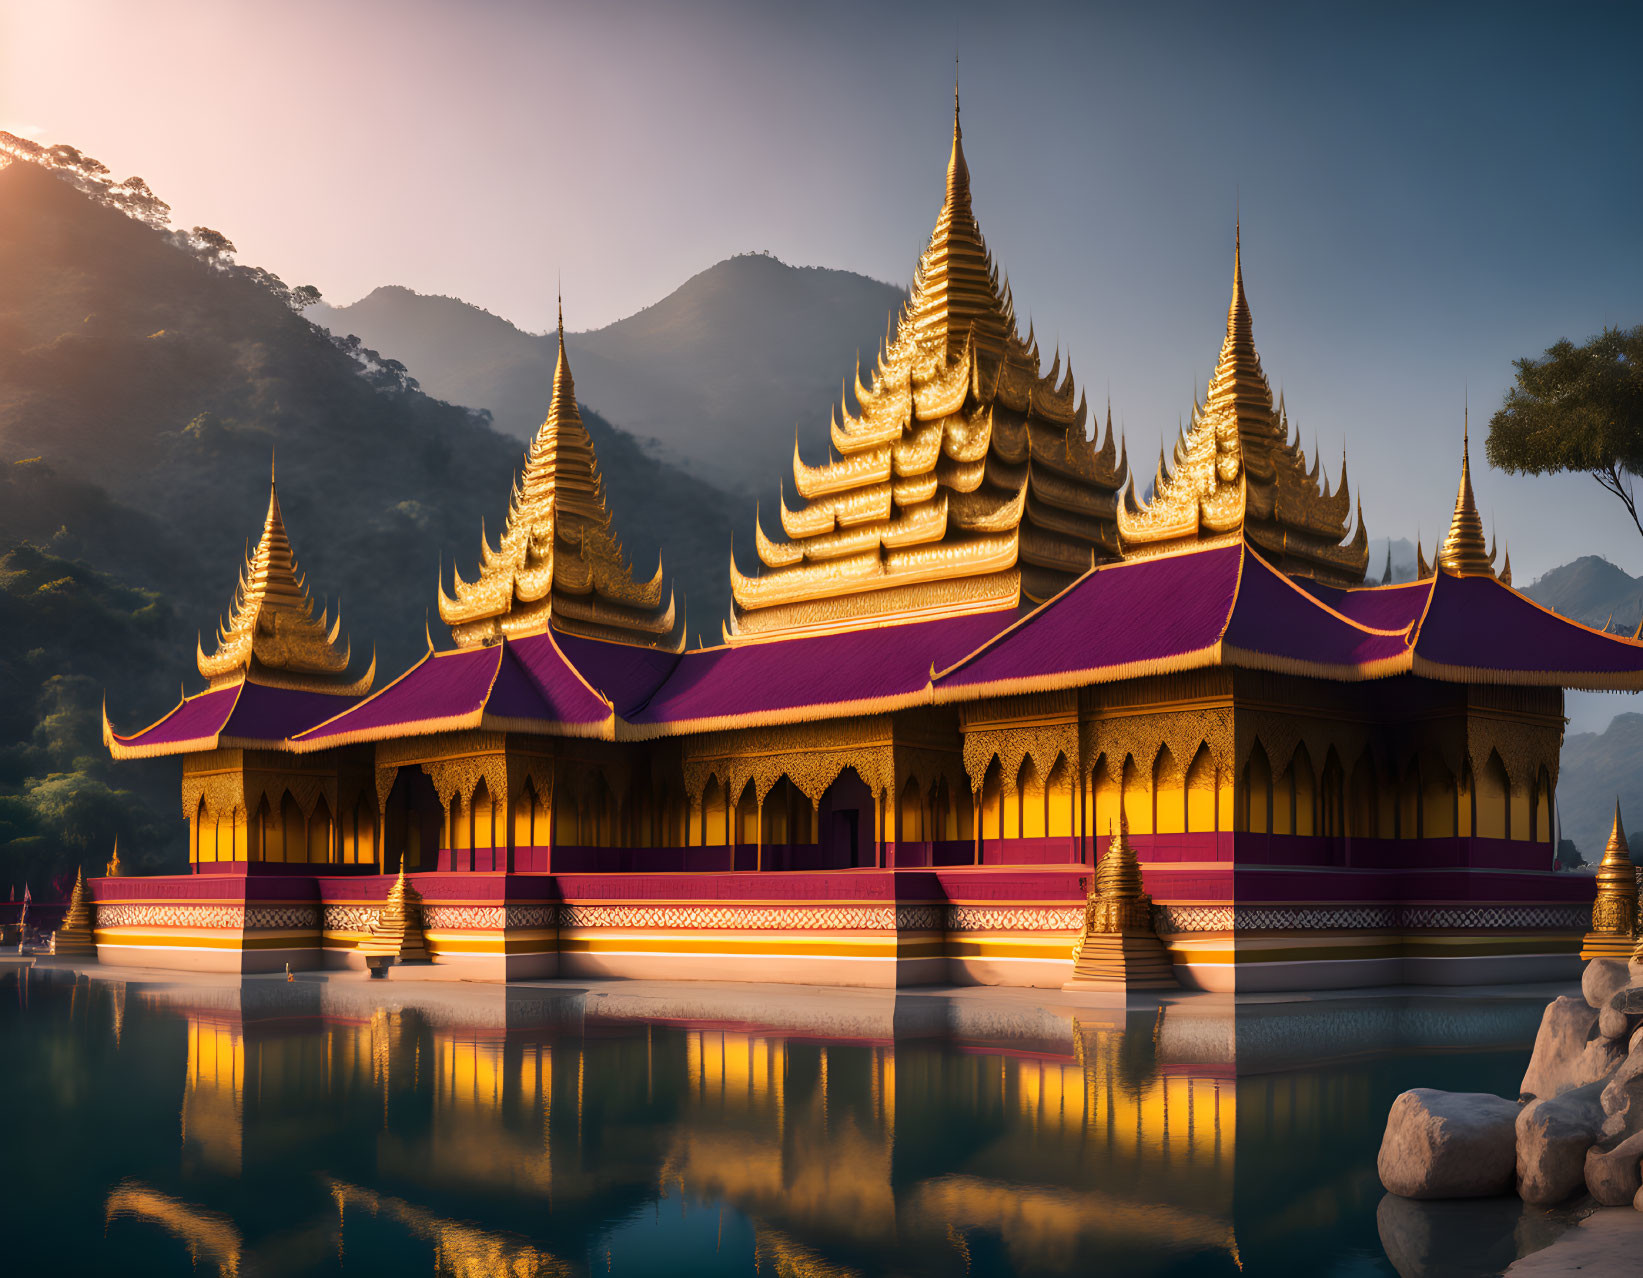 Golden Buddhist temple with spires reflected in water and mountains in warm sunset light